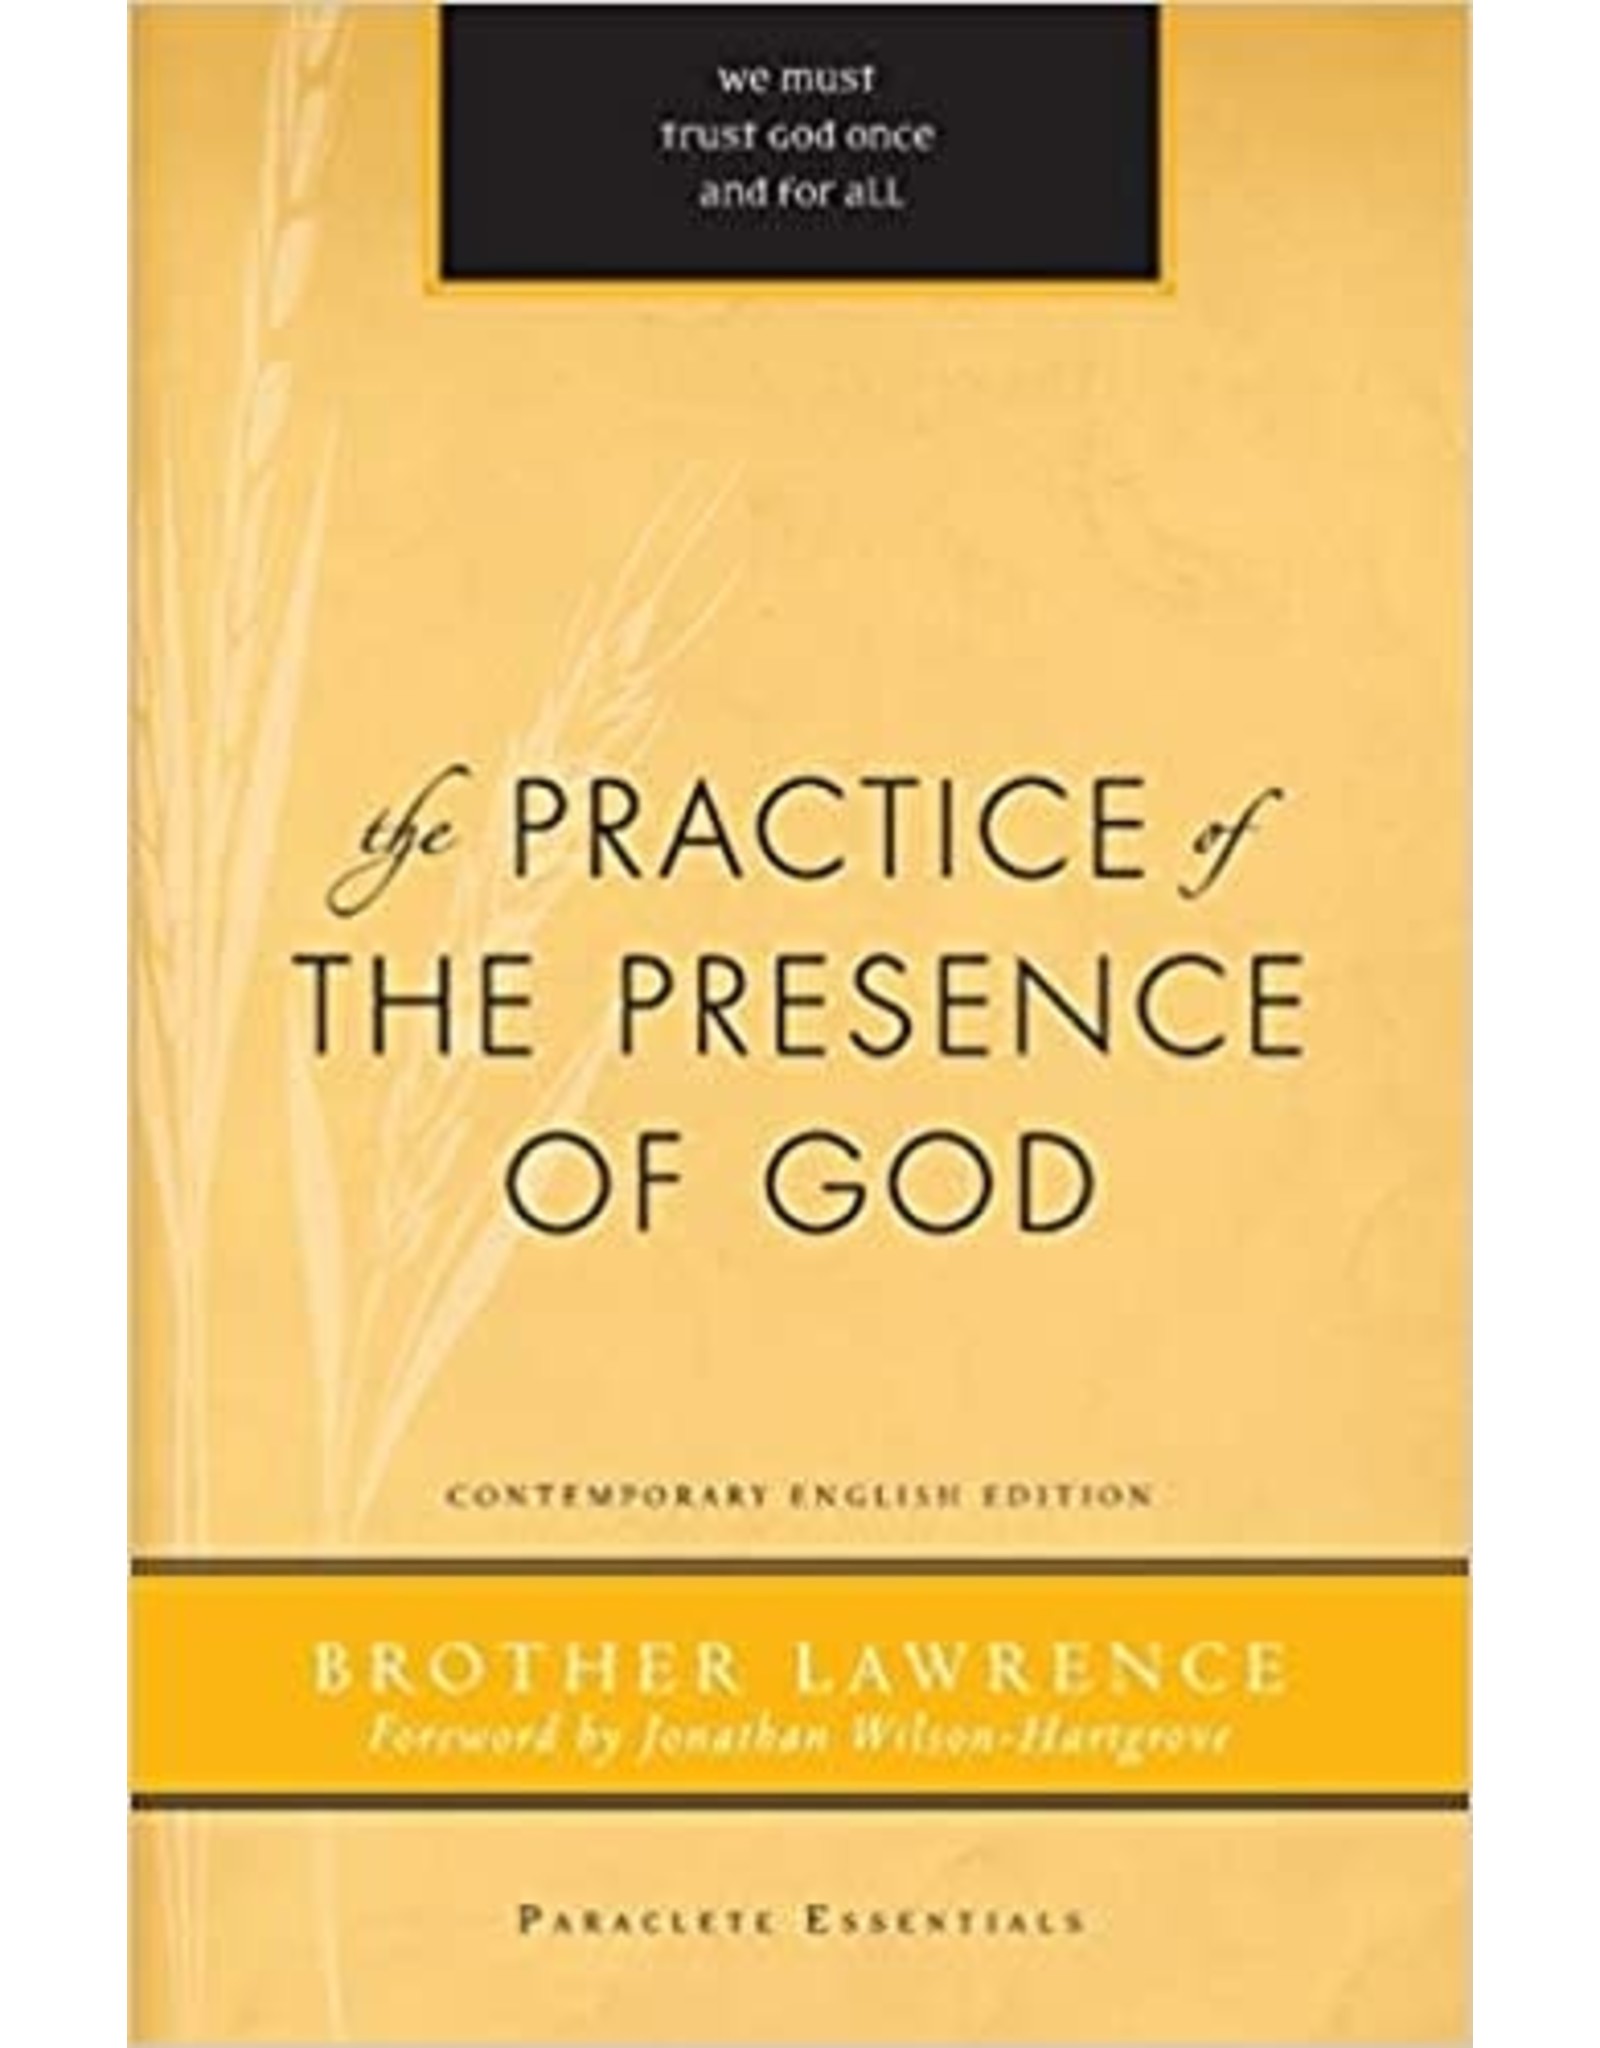 Paraclete Press The Practice of The Presence of God by Brother Lawrence